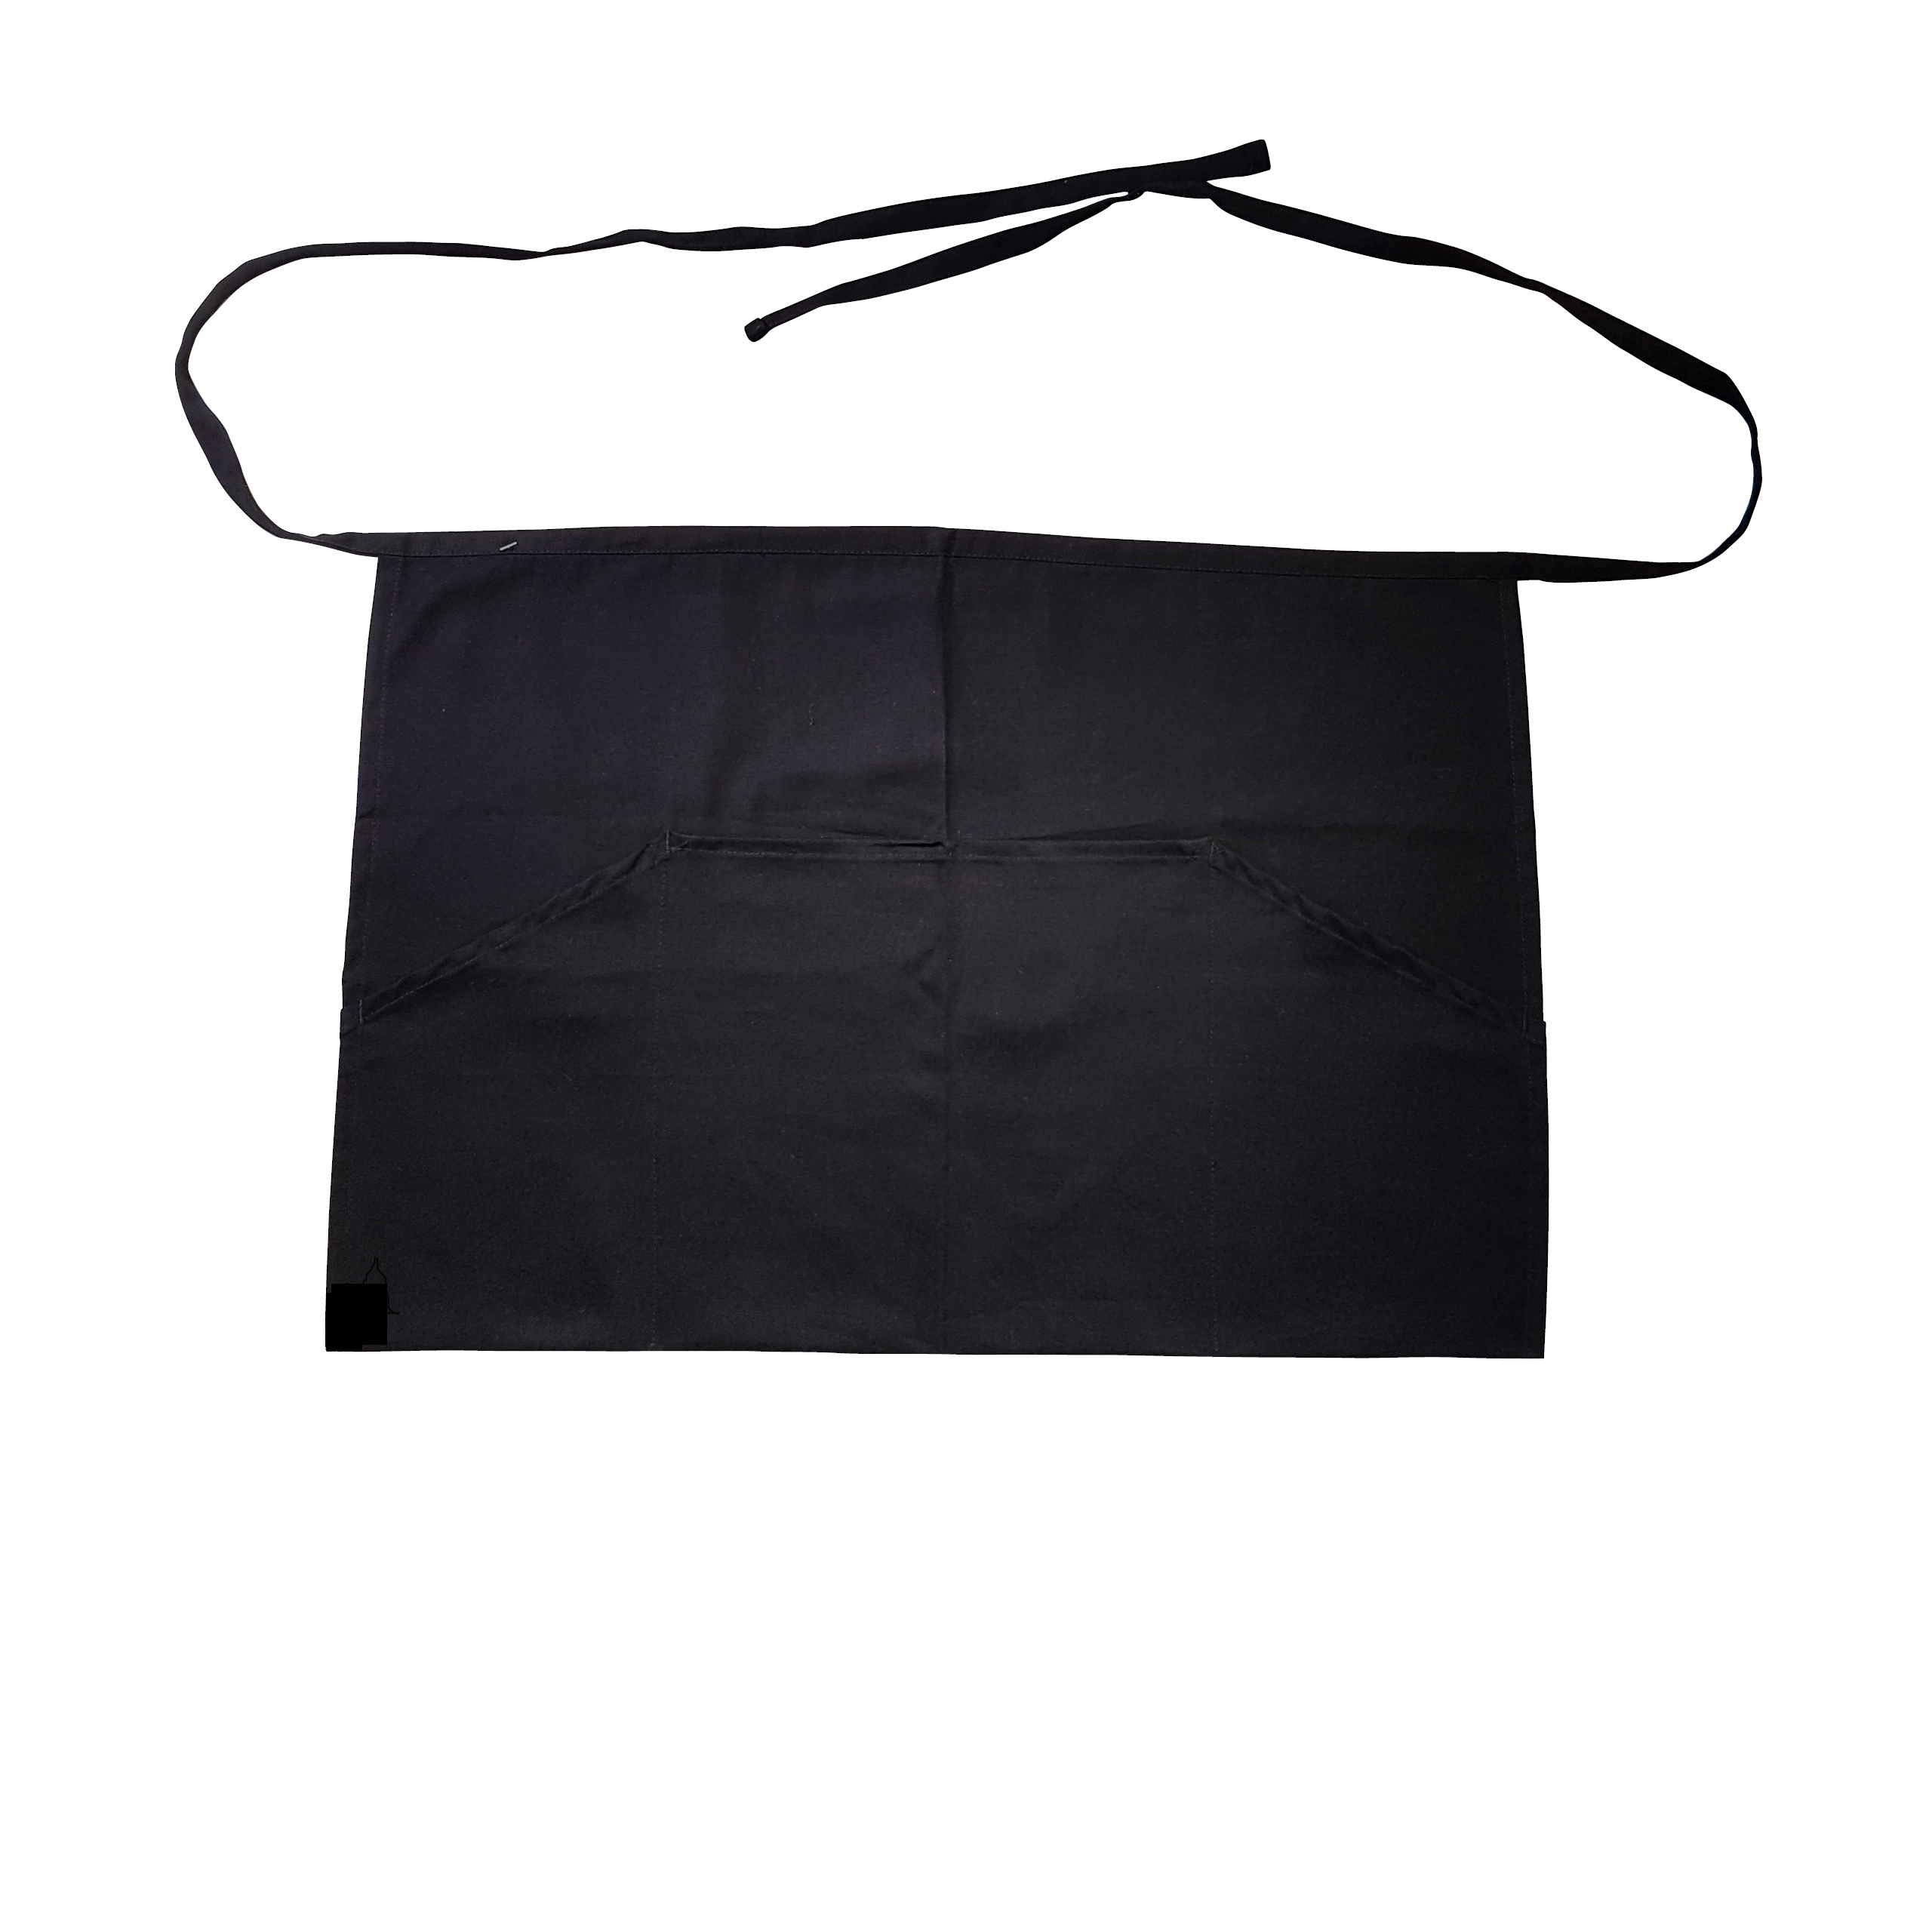 Bronta Mill Pack of 1 Waist Apron Black Short Apron Half Aprons Waitress Apron Waiter Aprons Mens Aprons Aprons for Women with Pockets for Home Kitchen Restaurant Work